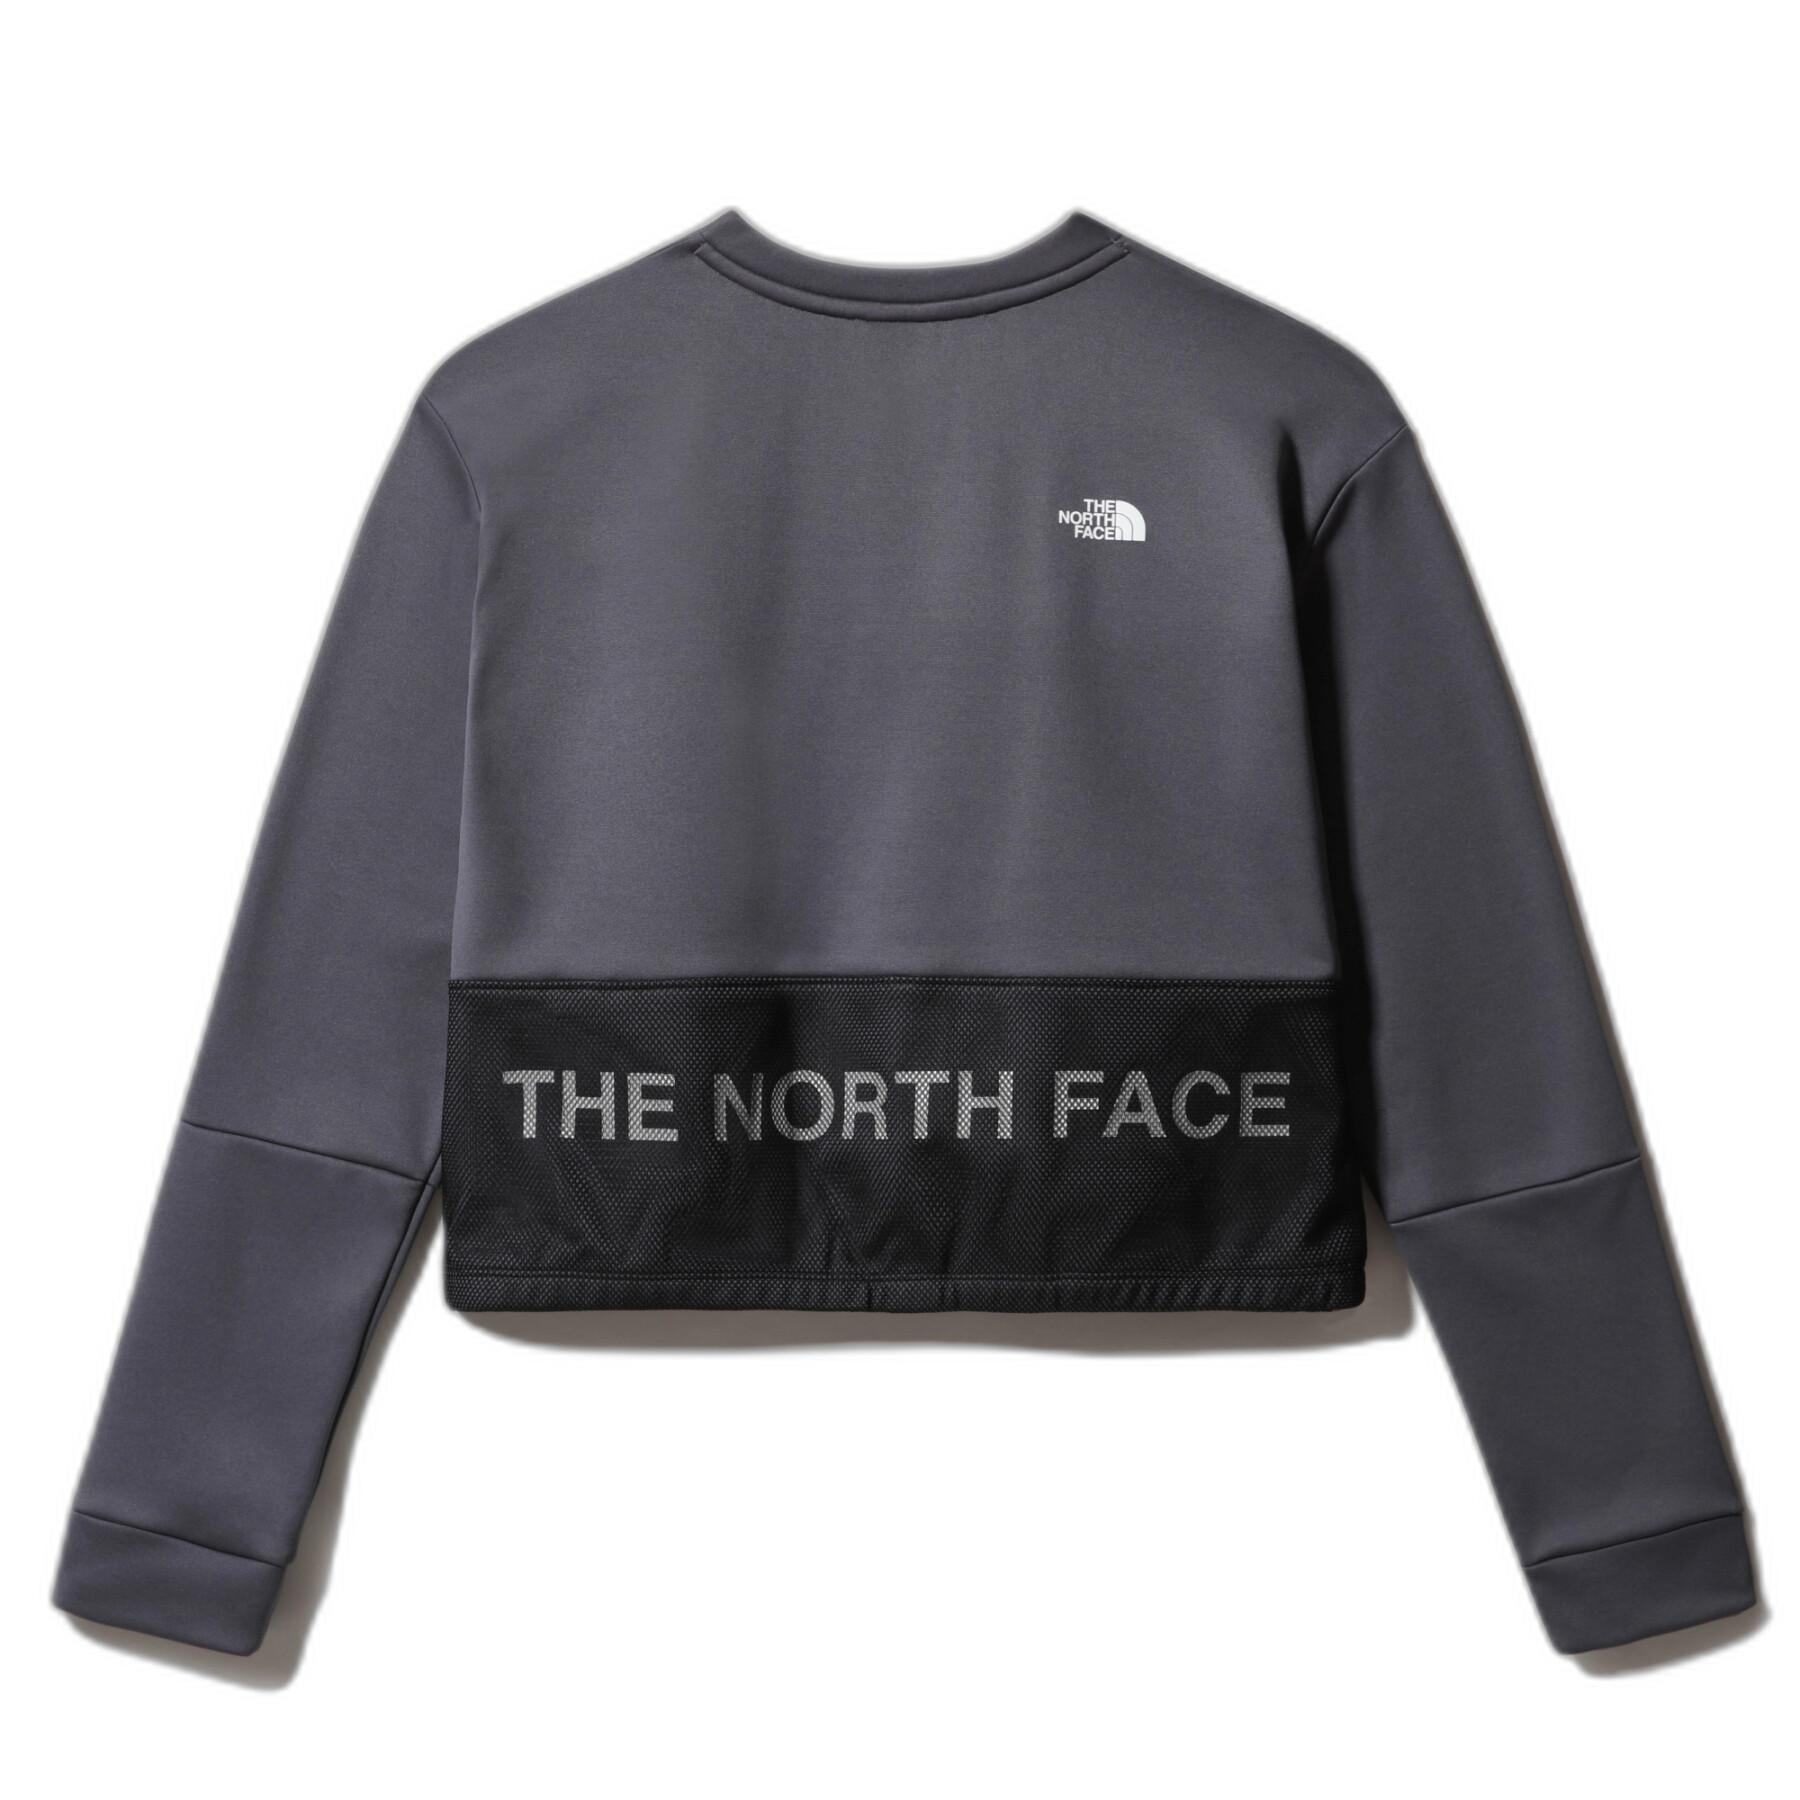 Damen Pullover The North Face Basic